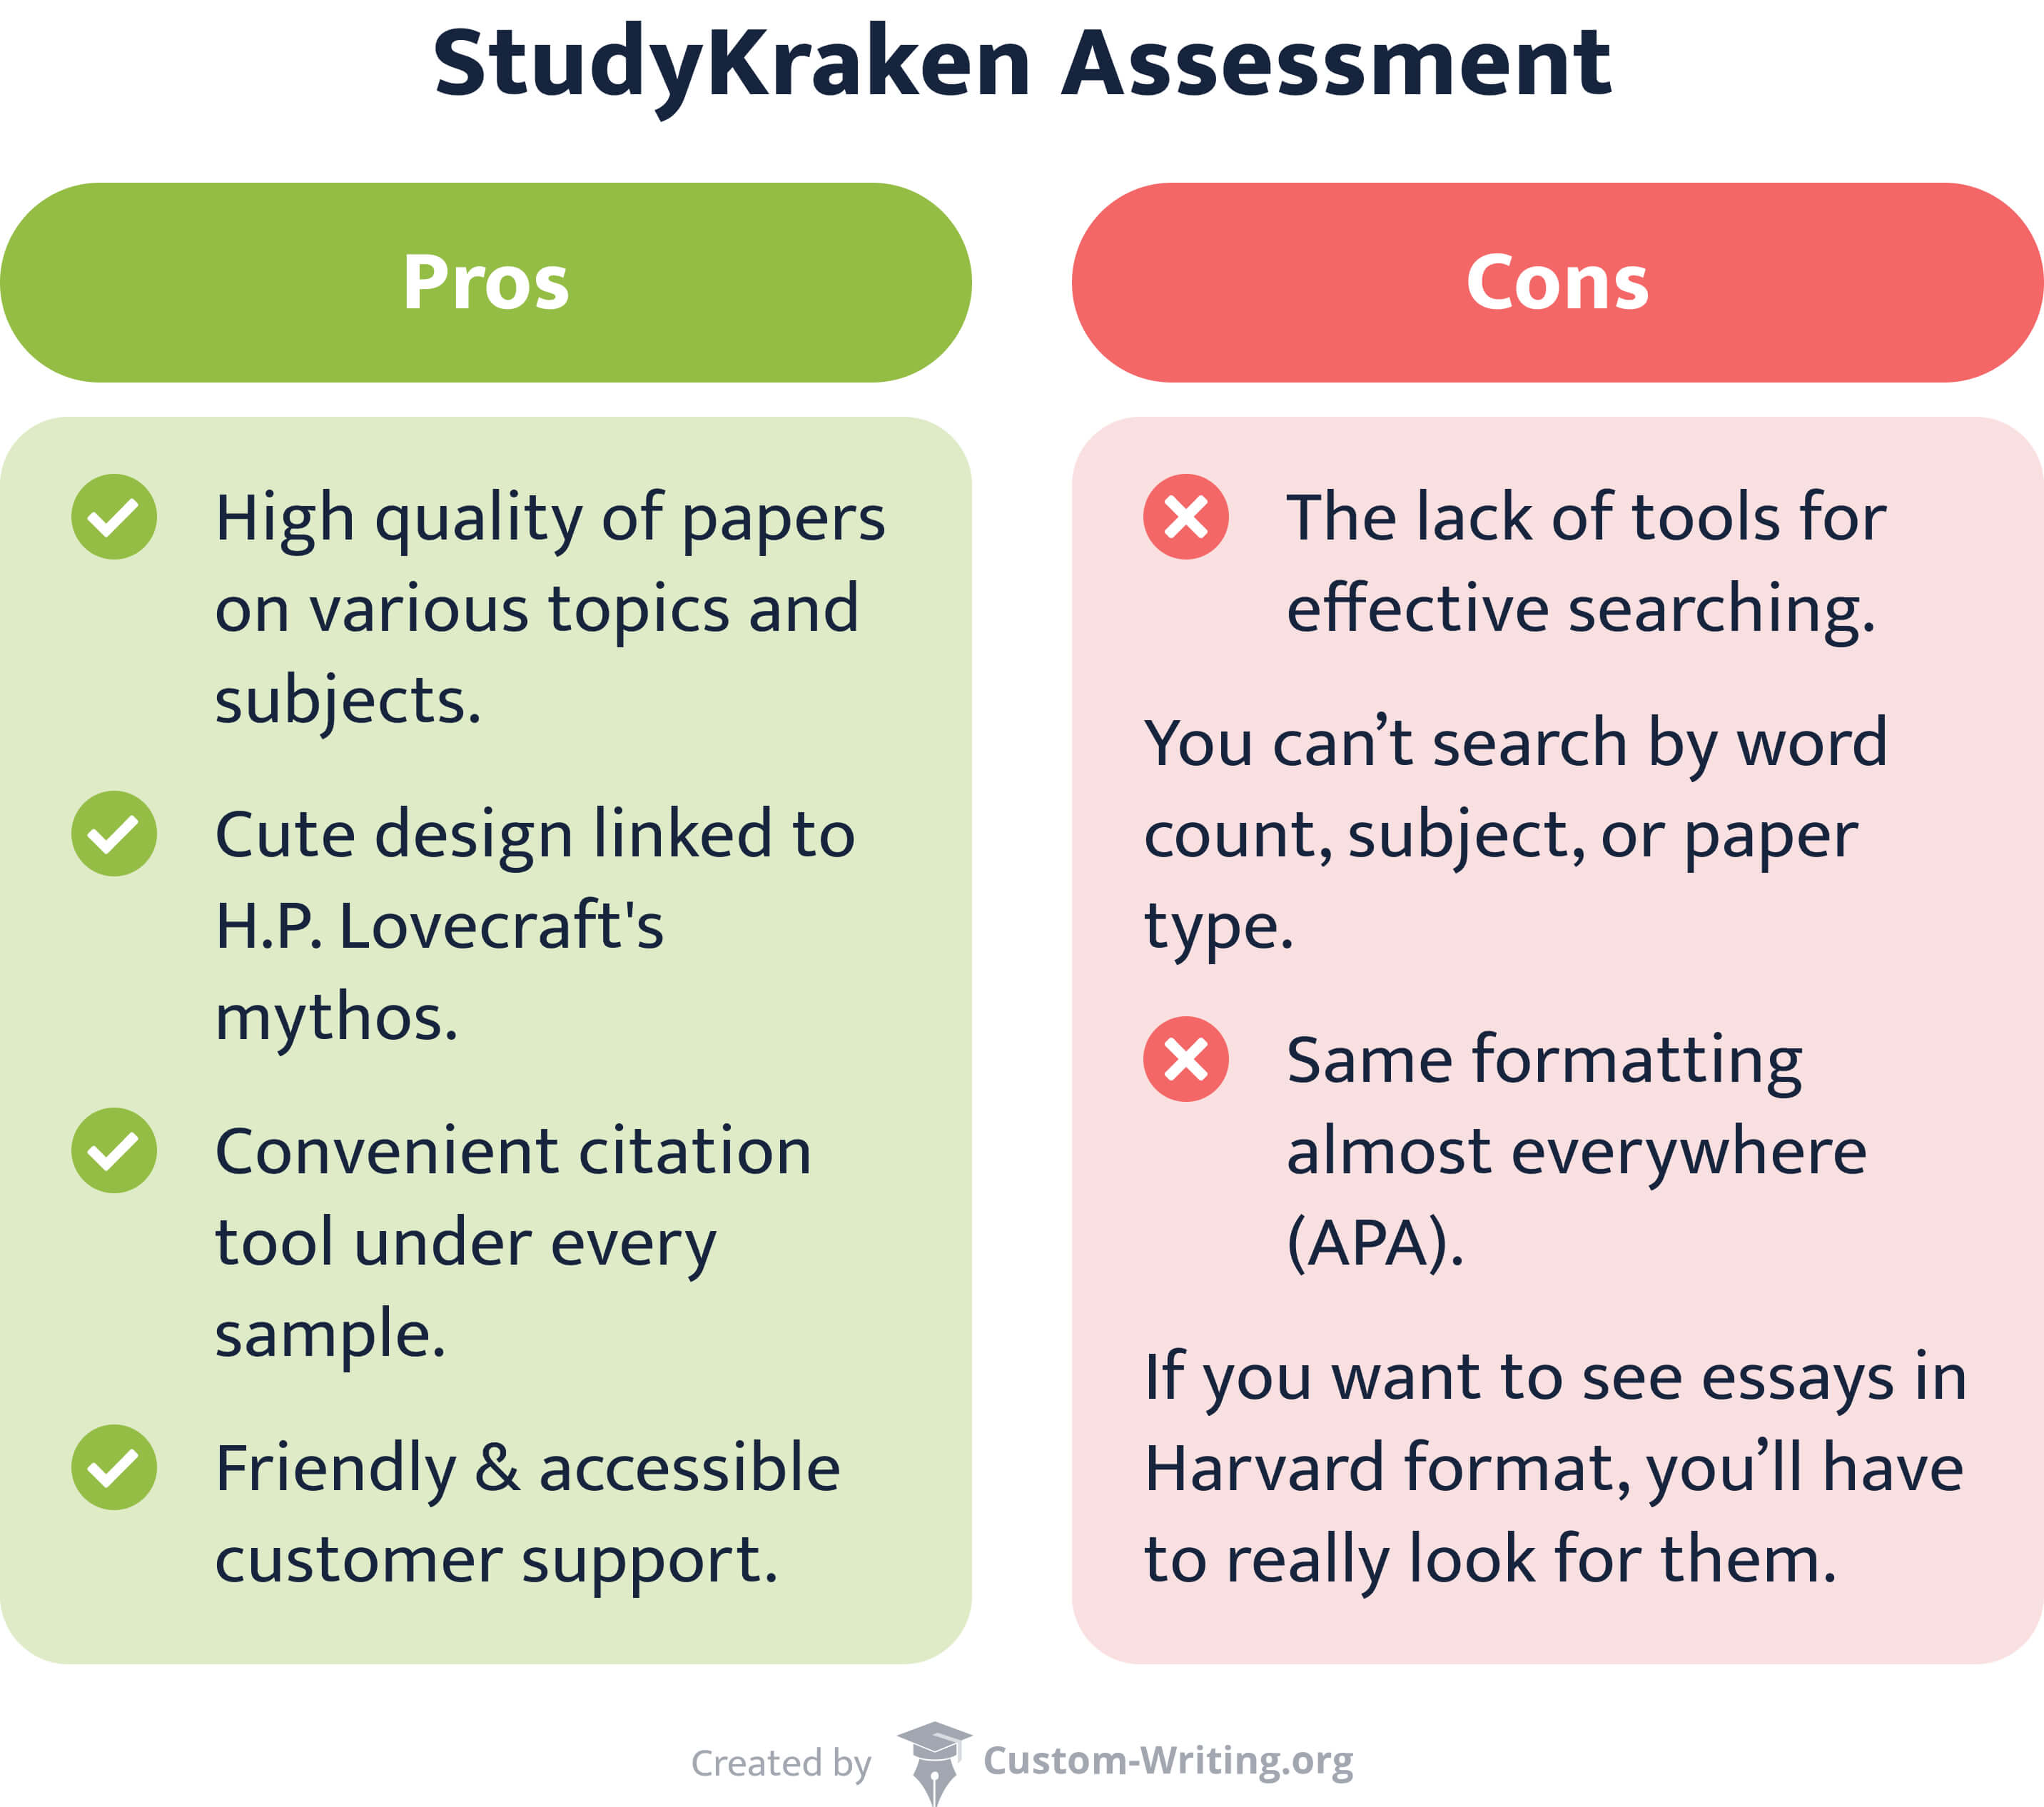 Pros and cons of StudyKraken.